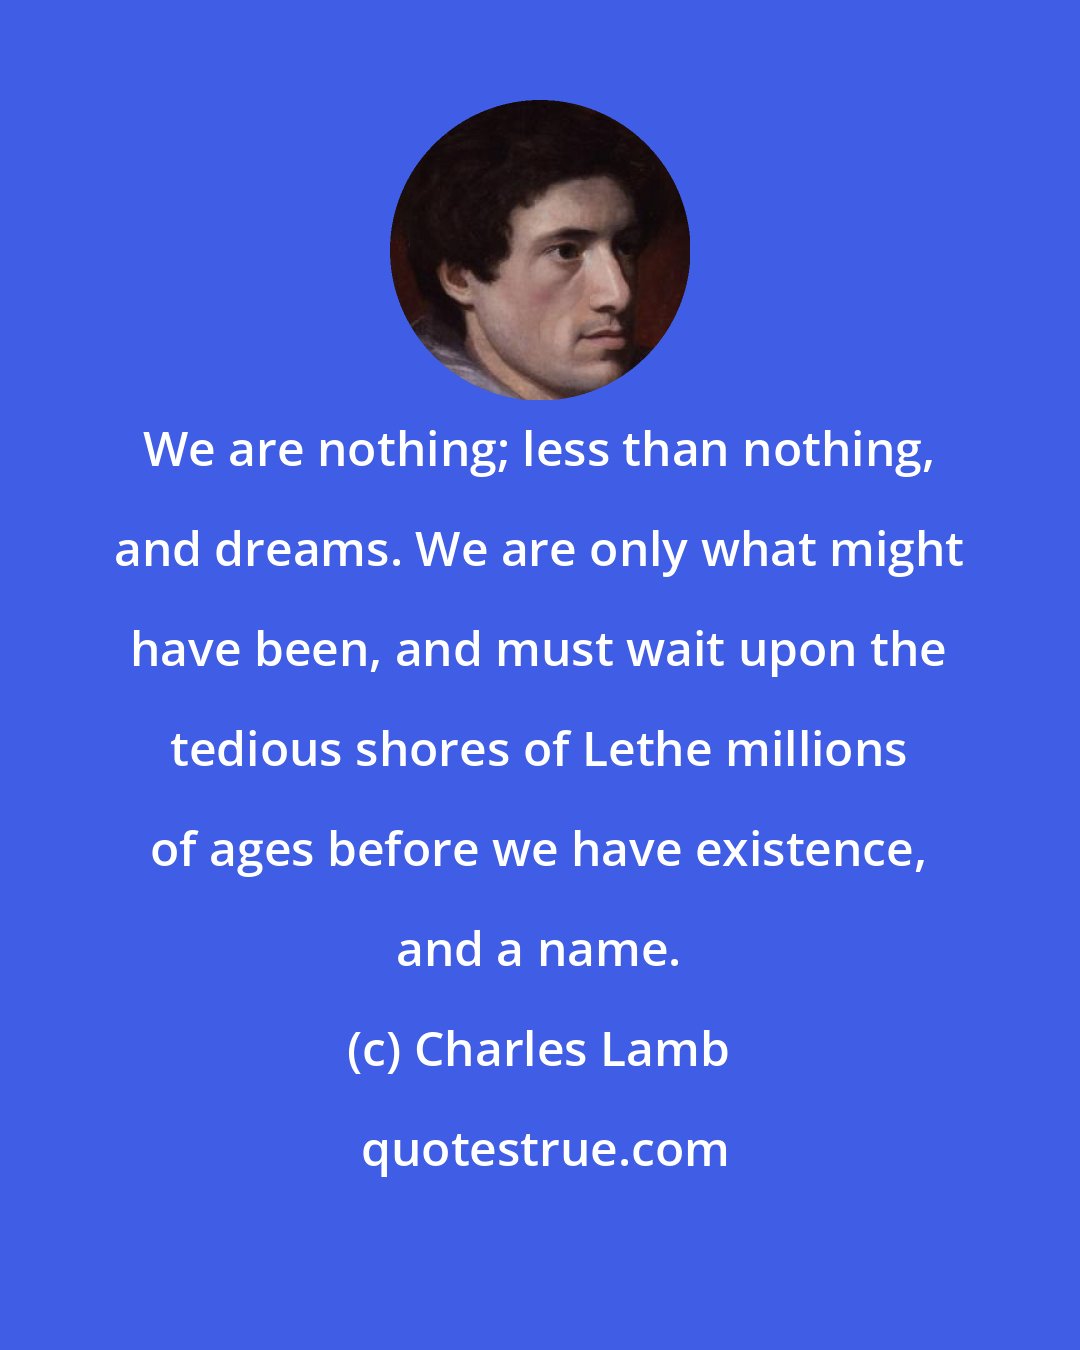 Charles Lamb: We are nothing; less than nothing, and dreams. We are only what might have been, and must wait upon the tedious shores of Lethe millions of ages before we have existence, and a name.